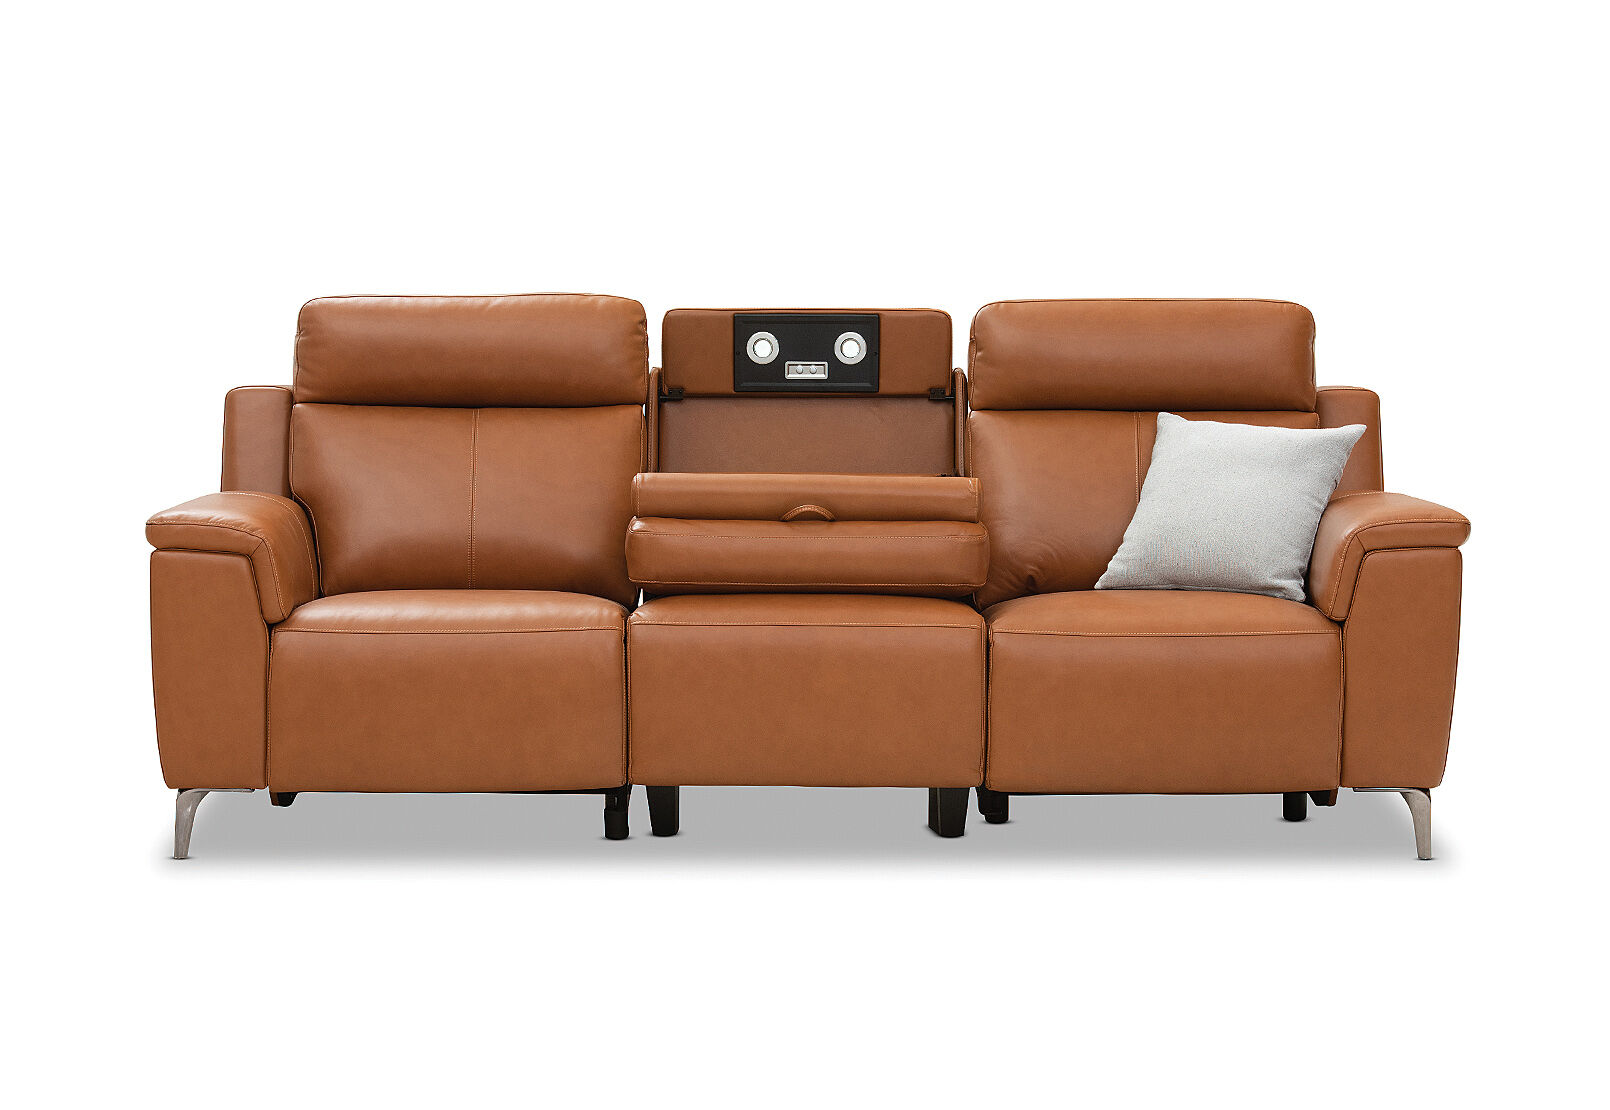 Electric Recliners Amart Furniture, 2 Seater Dark Brown Leather Recliner Sofa